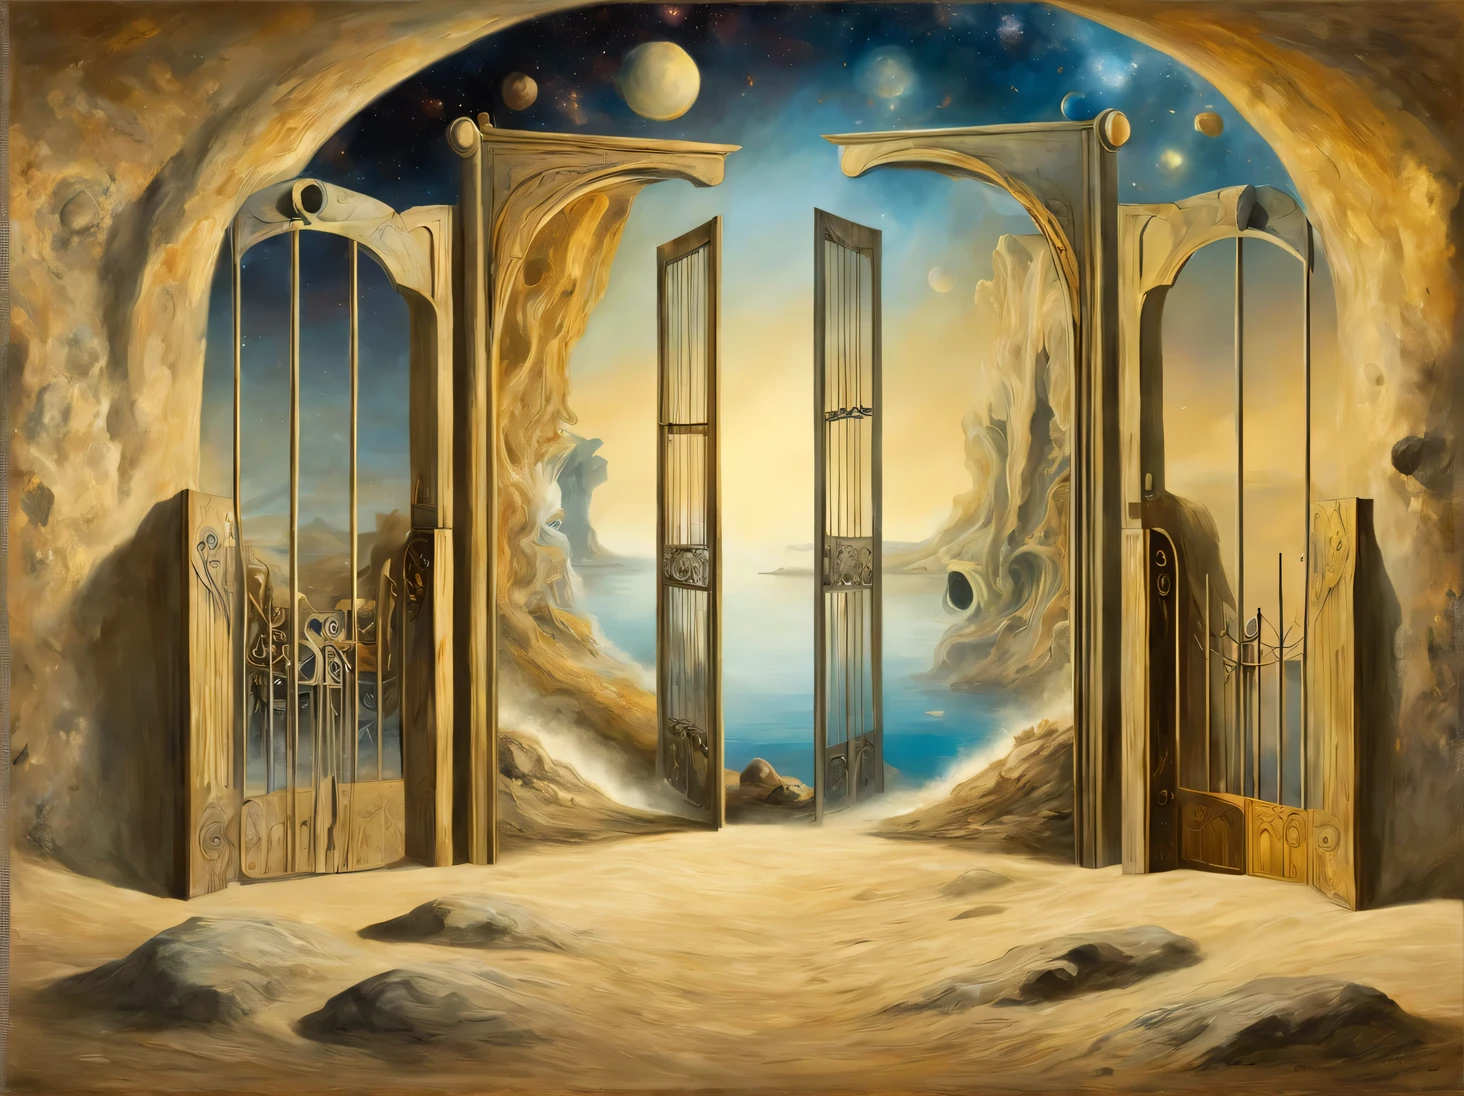 Invent and depict, what the Forgotten Gates of time and space would look like, if Salvador Dali wrote them.